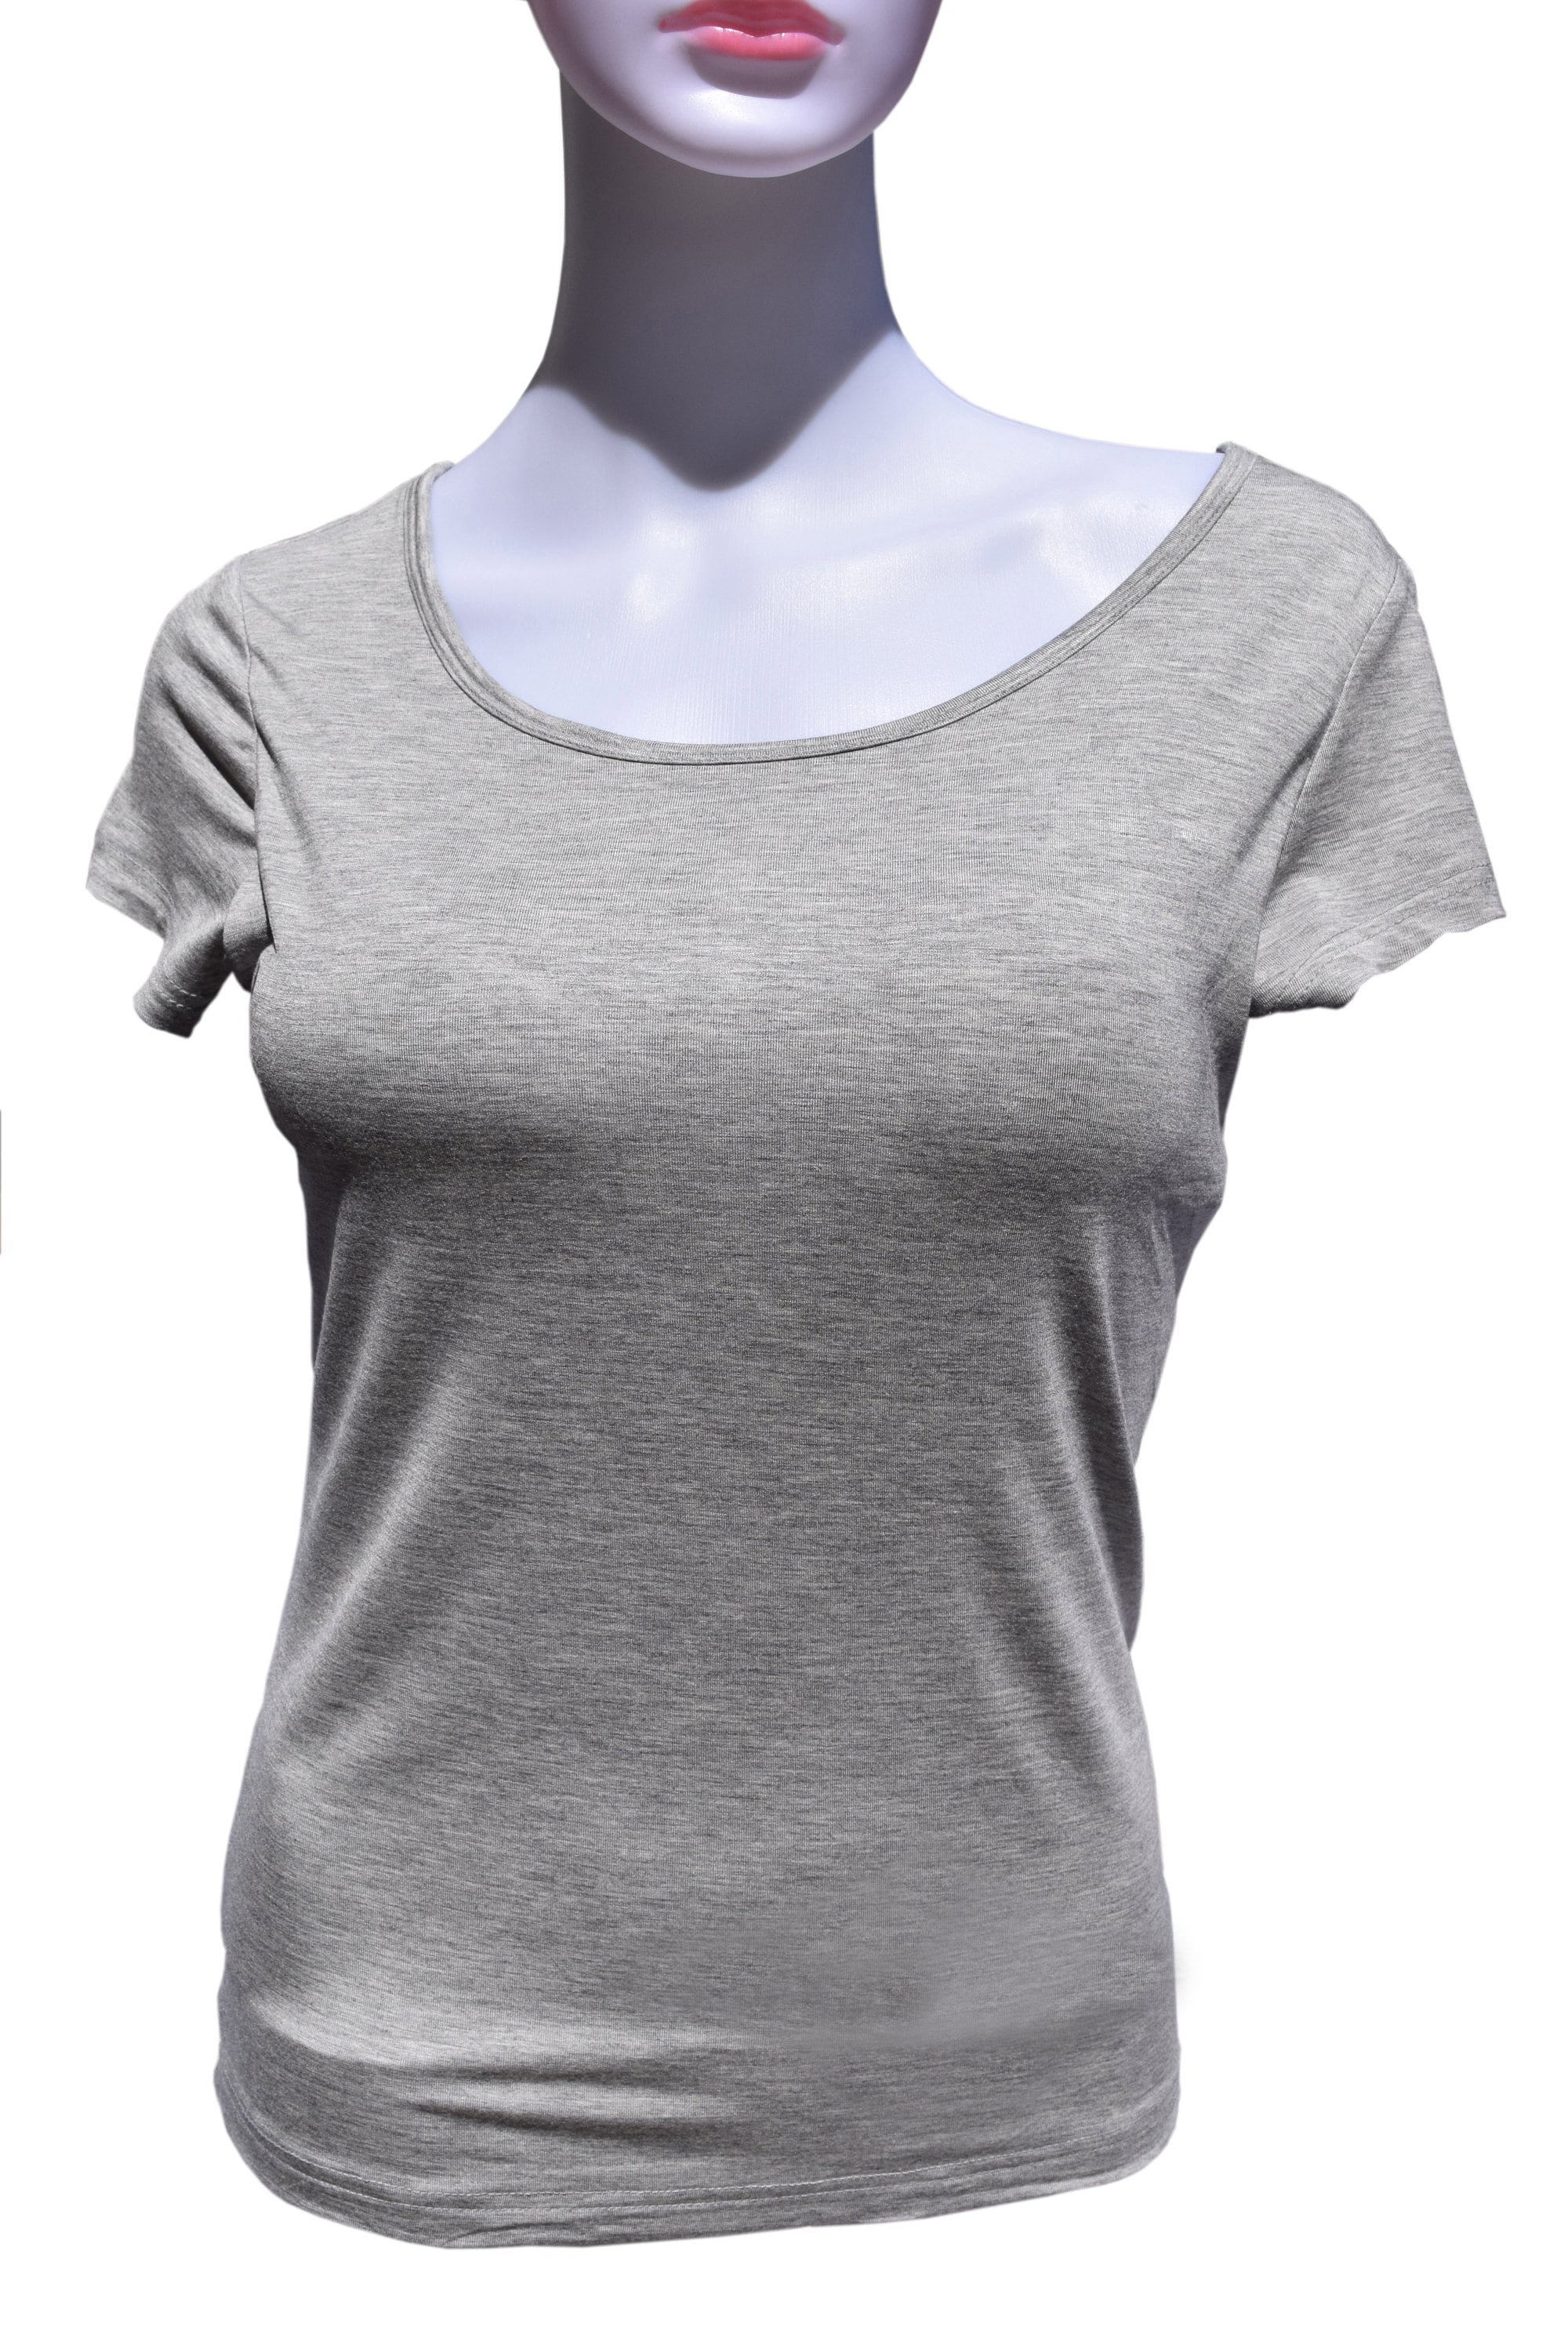 Women's Gray Yoga Athletic Shirt With Built in Bra Women's LIGHT GRAY Yoga  Athletic Shirt With Built in Bra 